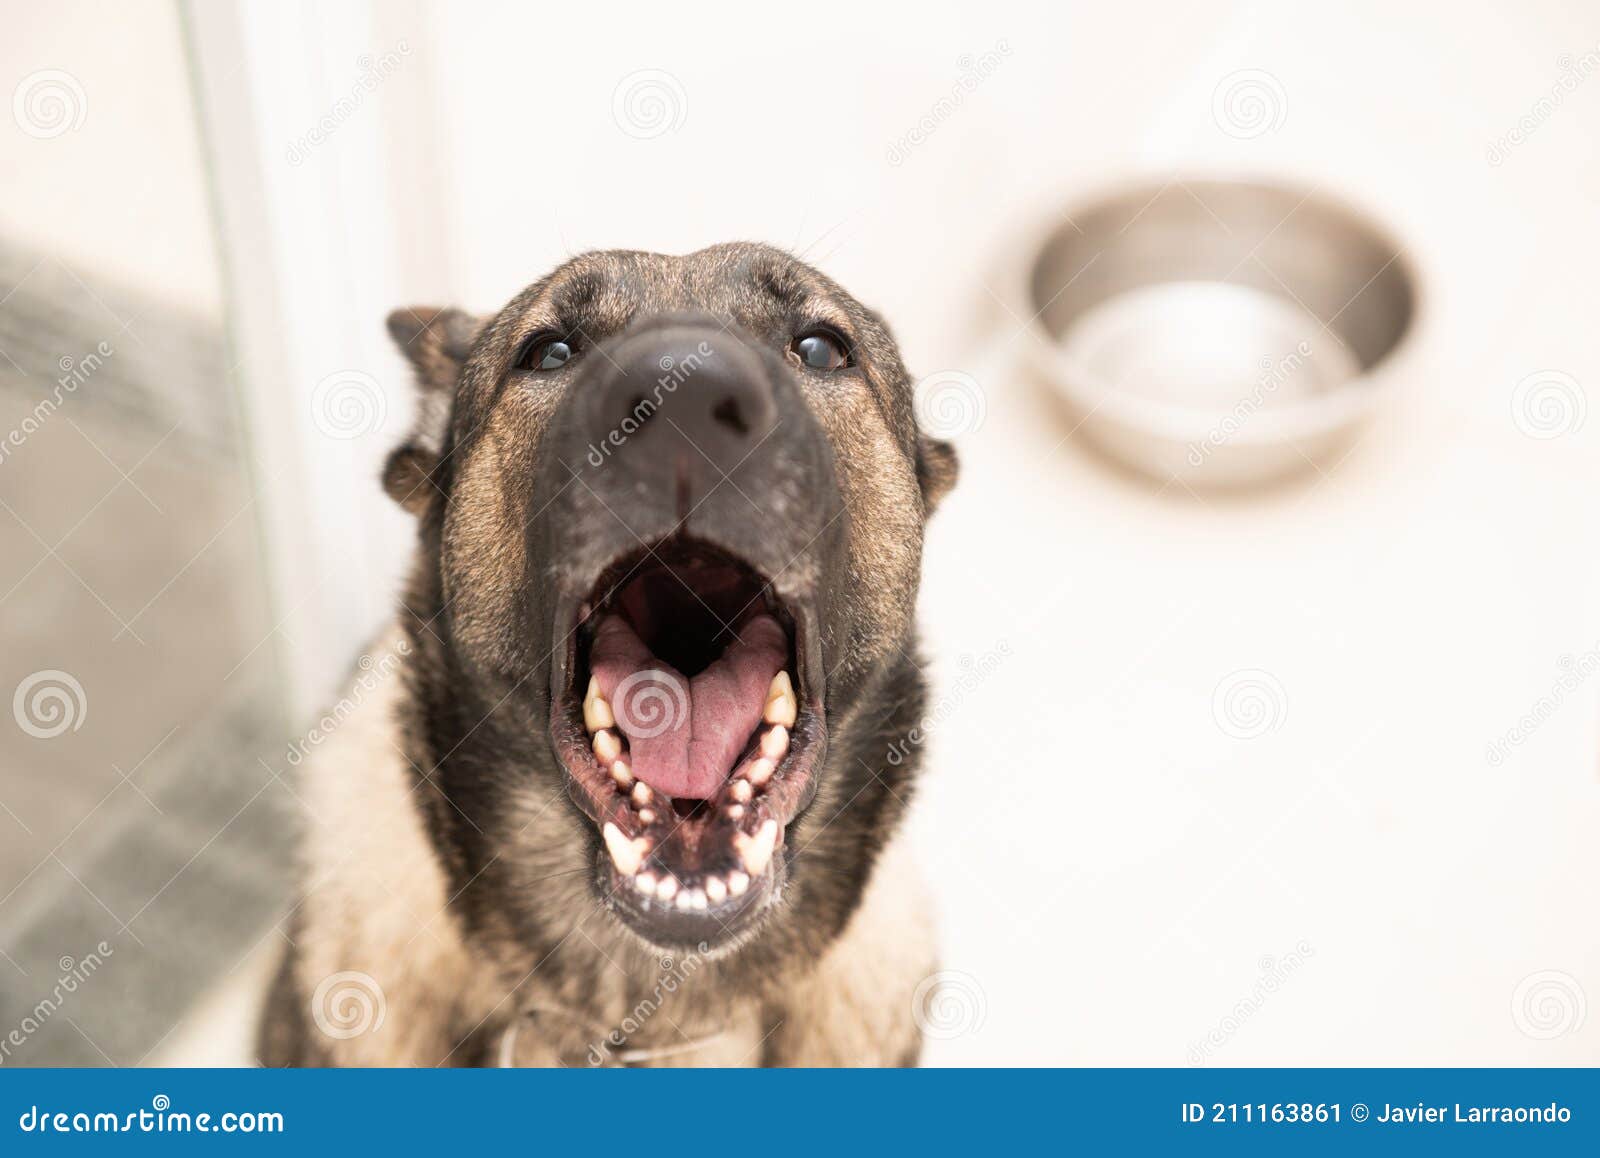 Adorable German Shepherd Shows Us His Open Mouth While Looking At The